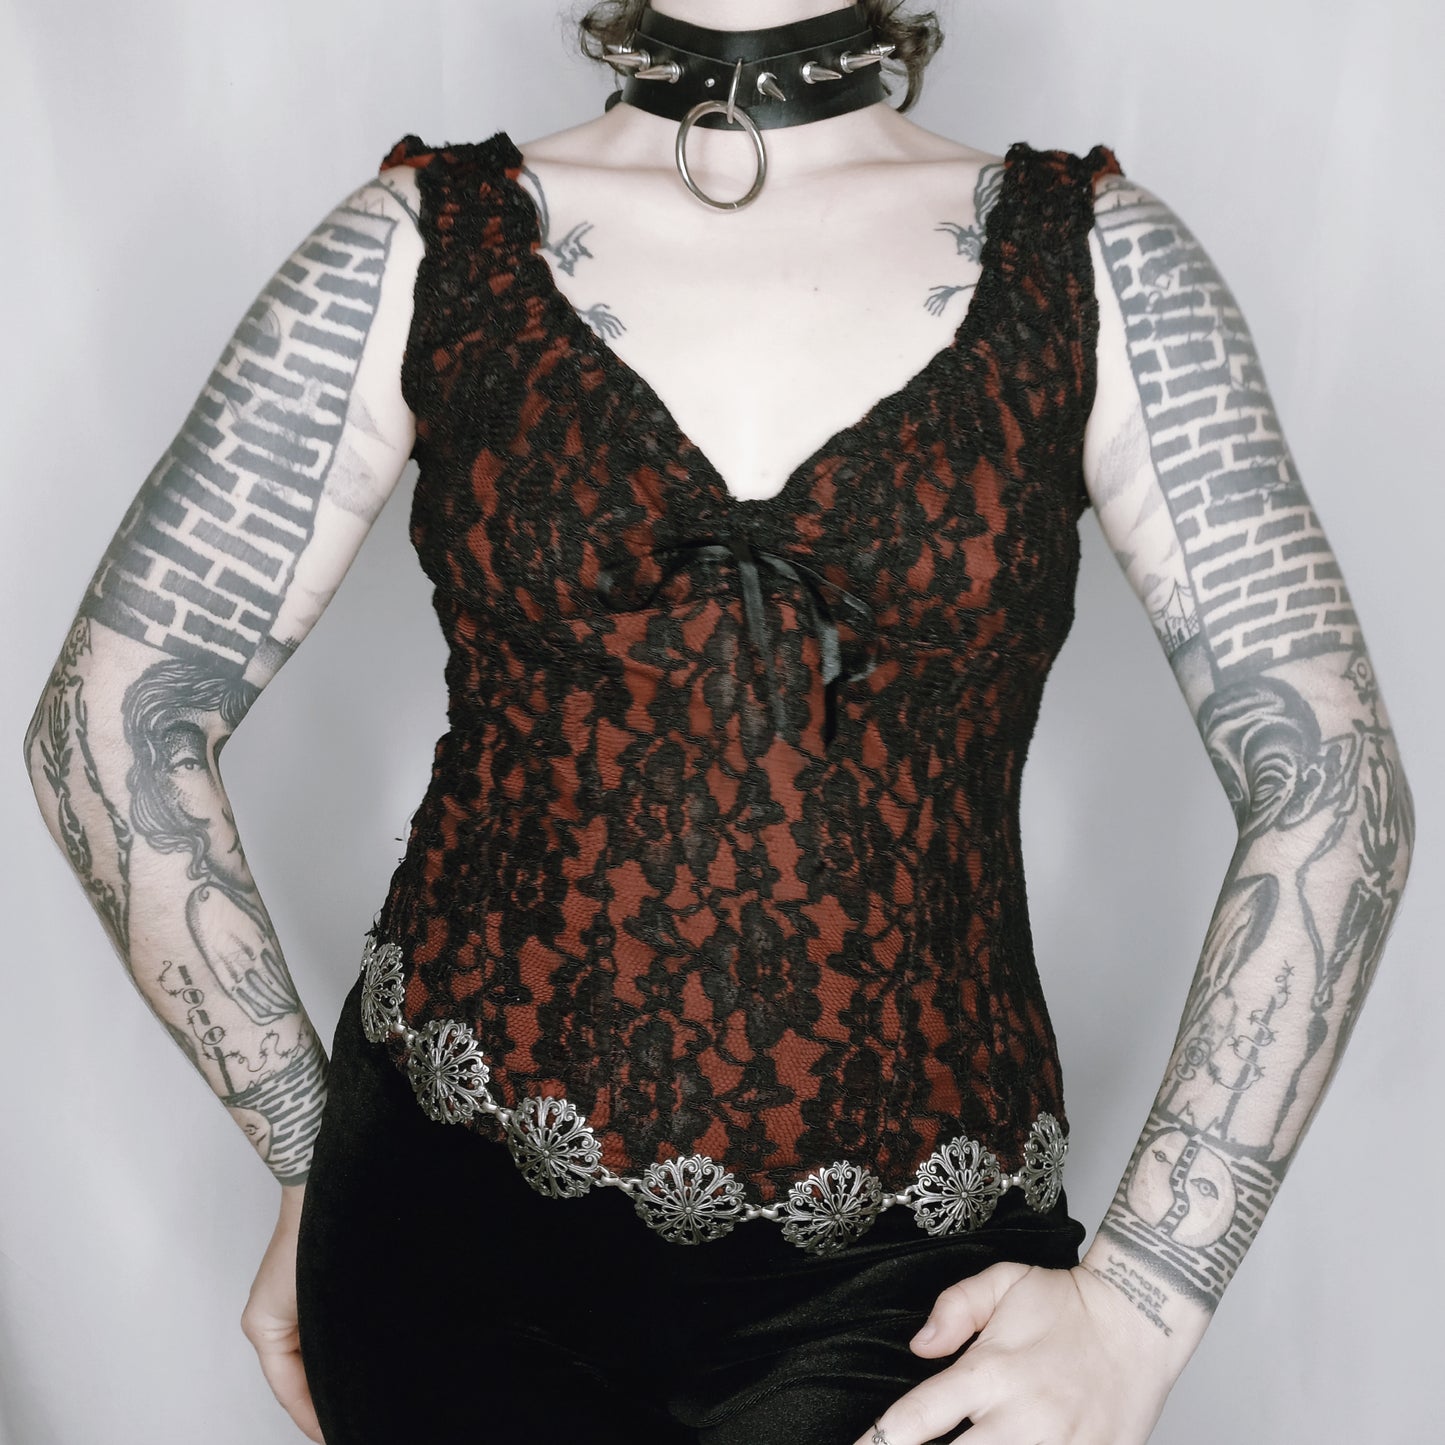 Red & Black Lace Corset Top - M